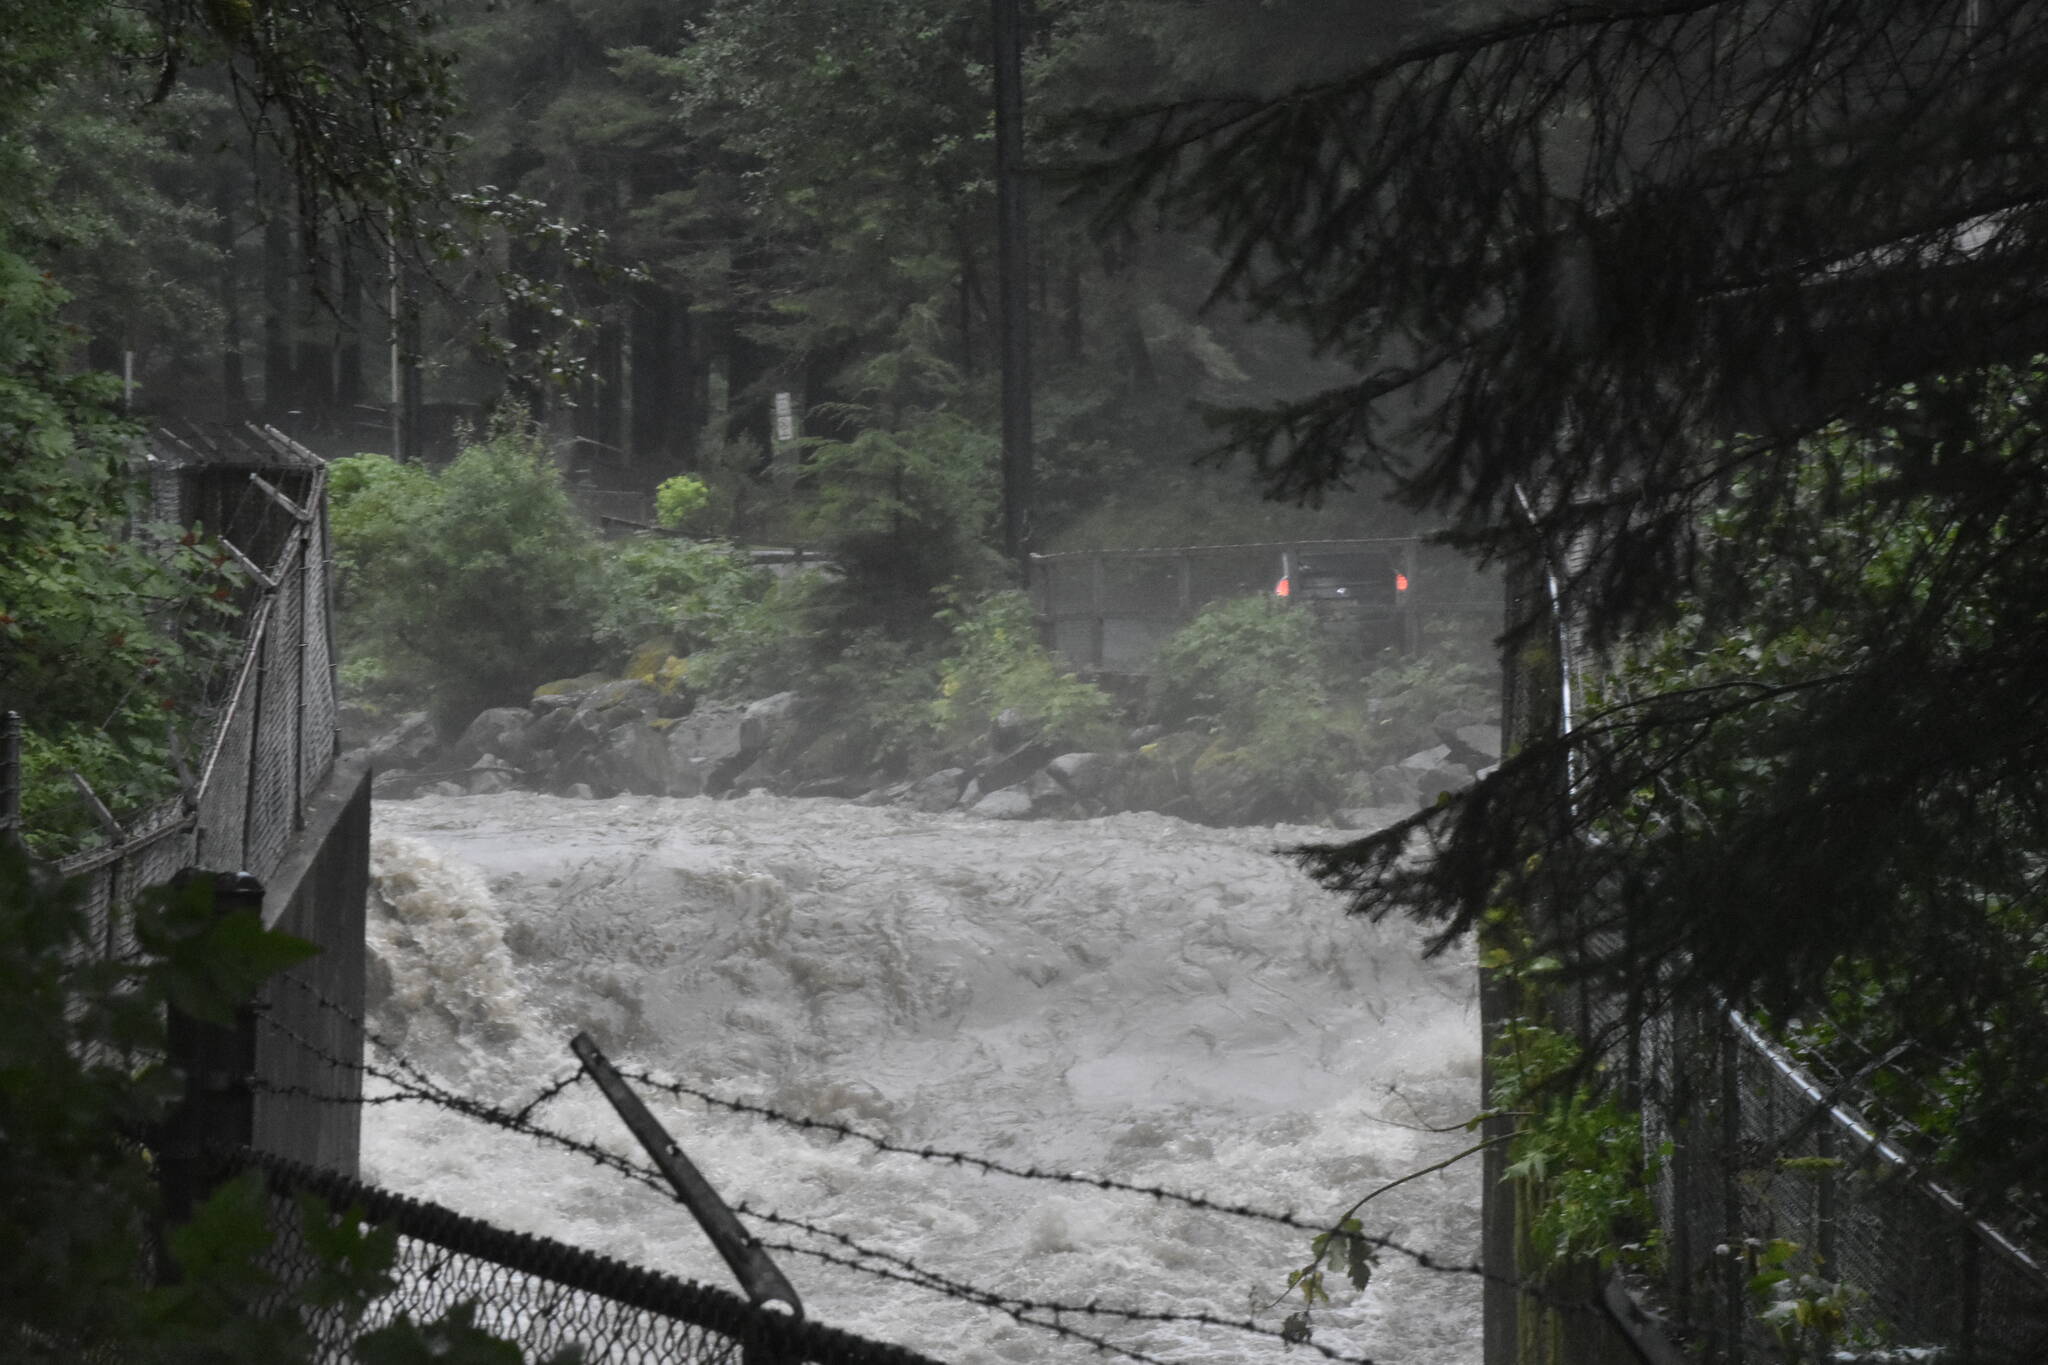 Water rushes down Gold Creek on Aug. 13, 2021. Juneau residents can expect heavy rain and strong winds beginning Friday. Forecasters expect the strongest winds late Friday night. (Peter Segall/Juneau Empire)